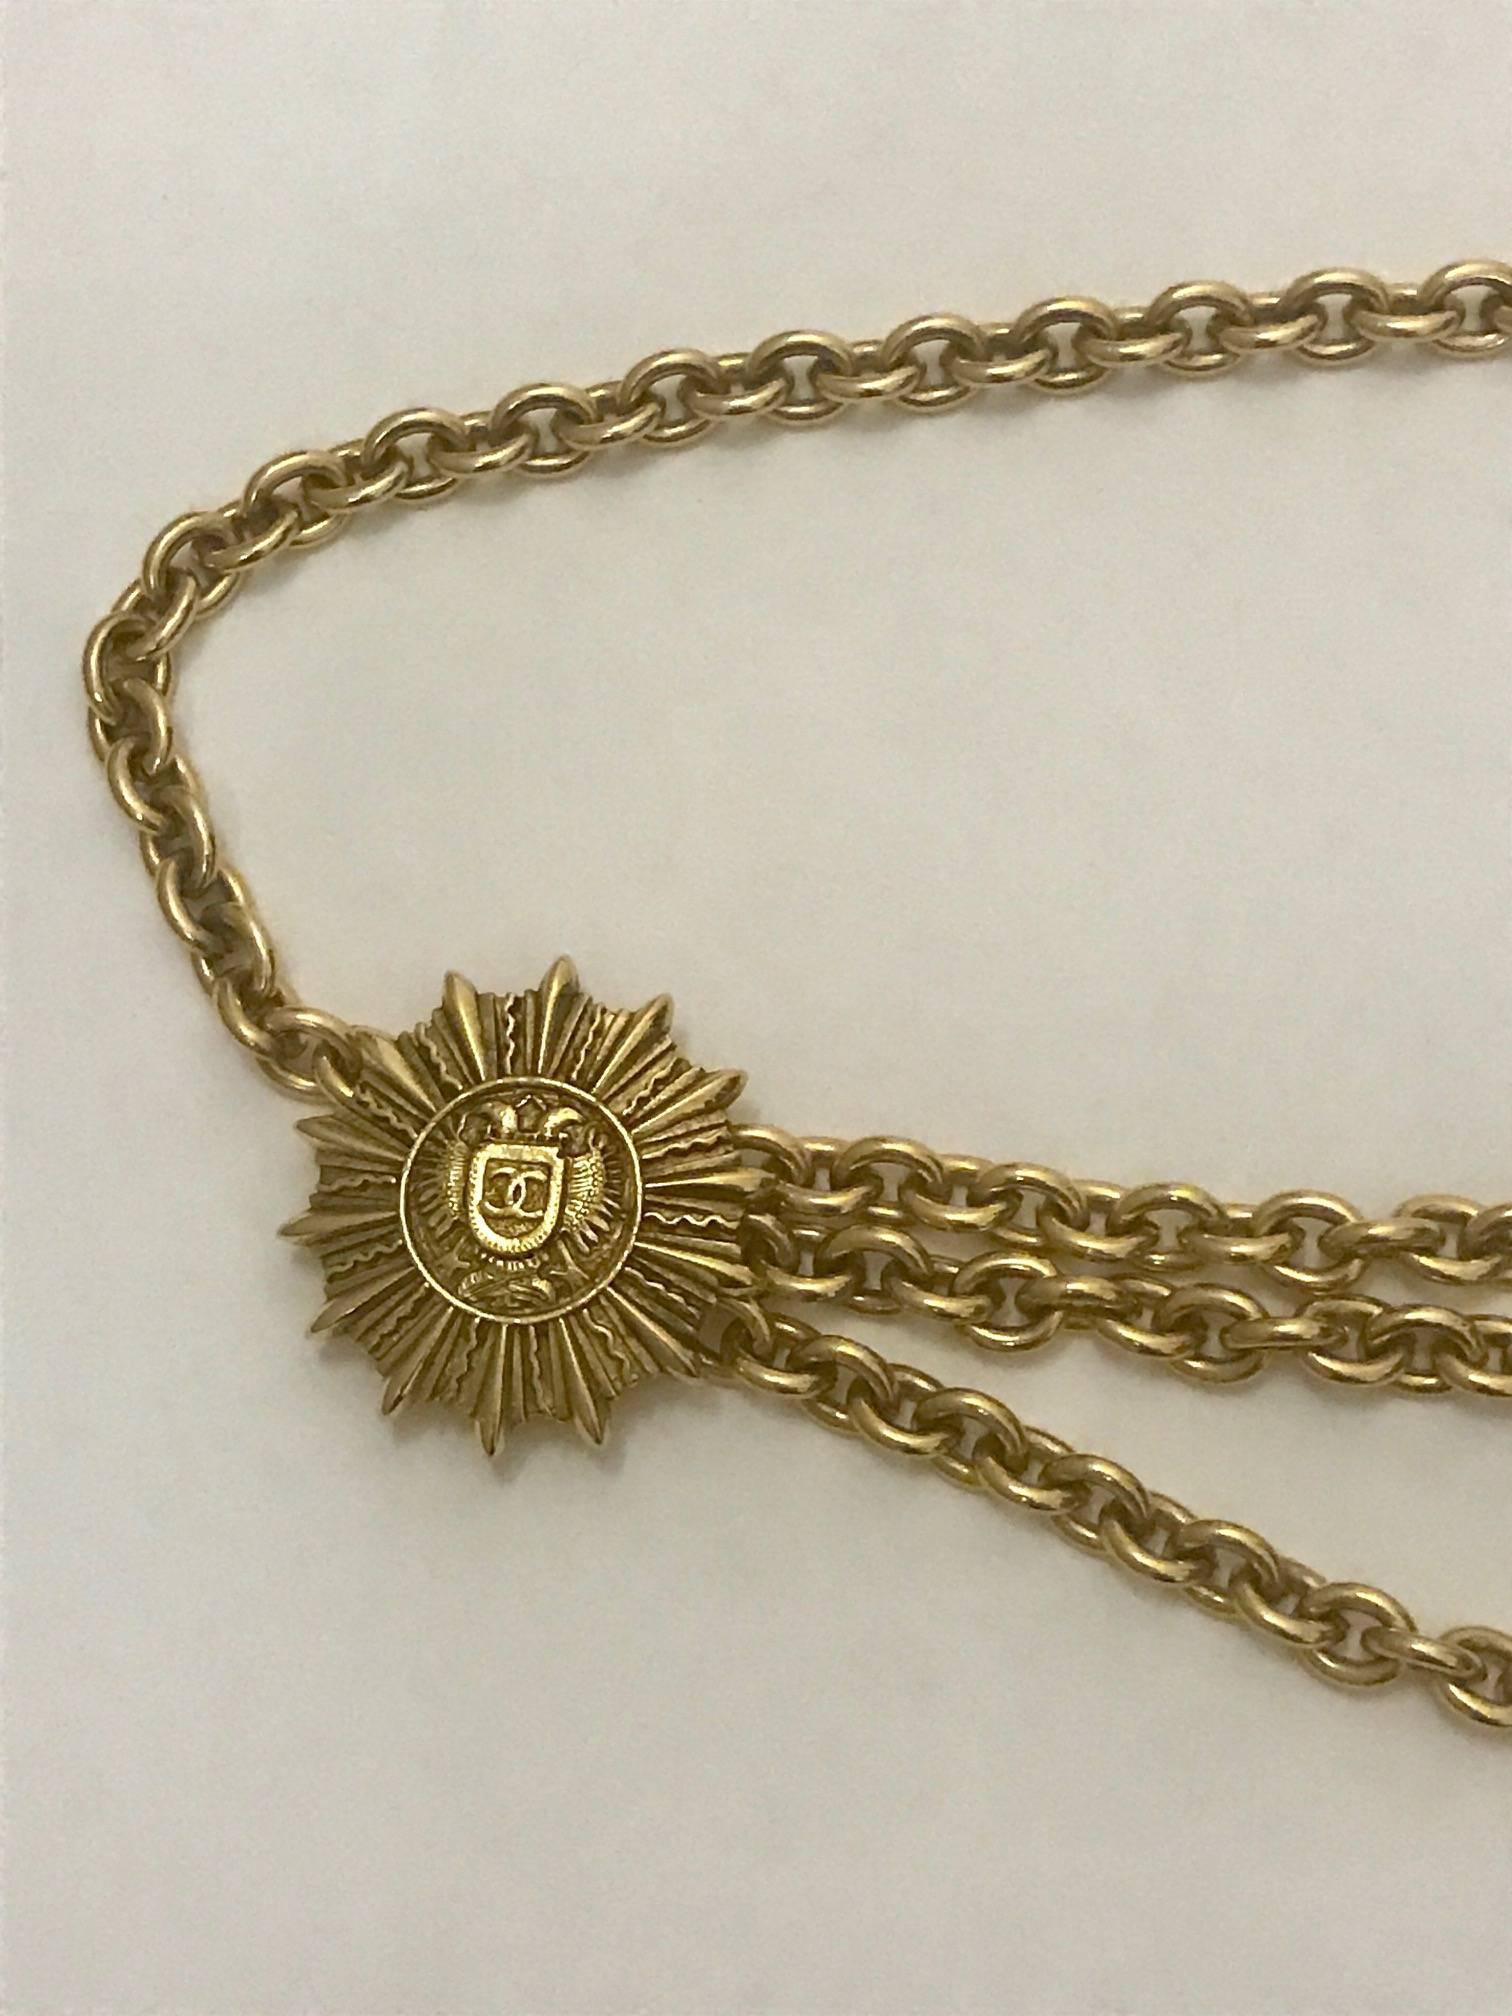 Chanel vintage 1980's gold tone chain belt featuring sunburst medallions with eagles and logo shields at center. Triple chain at front. Hanging CC logo.

Closes with hook at back of medallion.

Stamped '(copyright) Chanel (registered), CC, Made